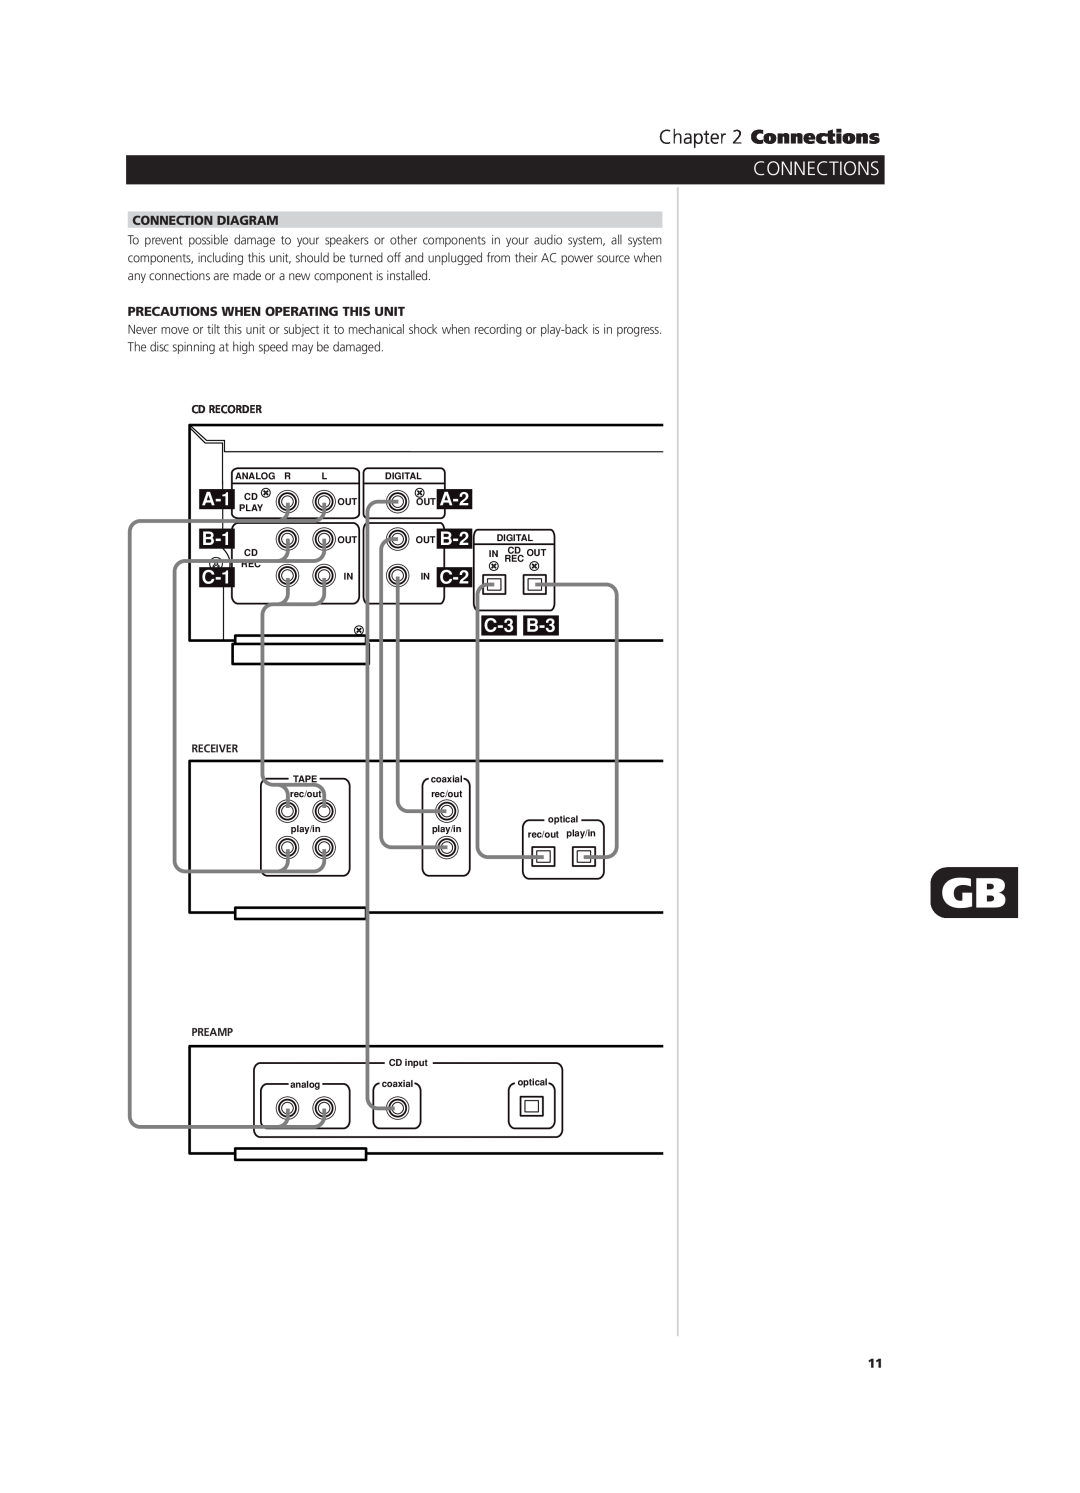 NAD C660 owner manual Connections, Connection Diagram, Precautions When Operating This Unit, A-1 PLAY 